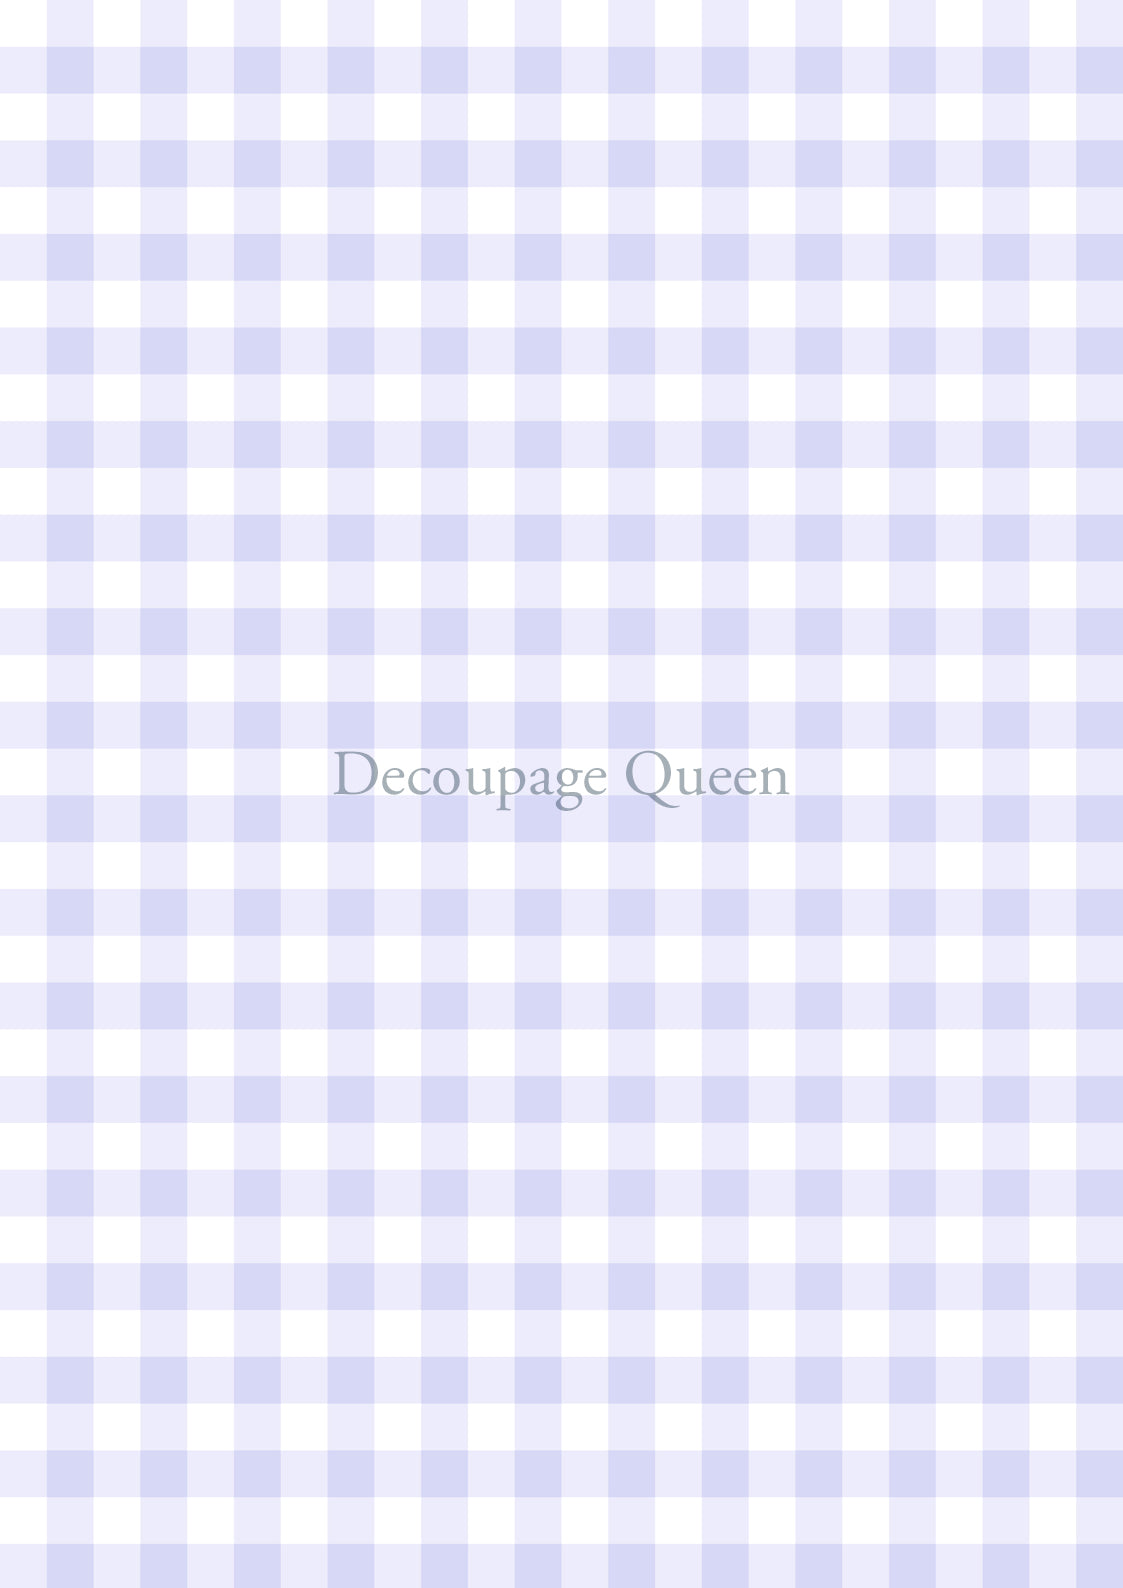 Purple Gingham Rice Paper A3 Decoupage Queen